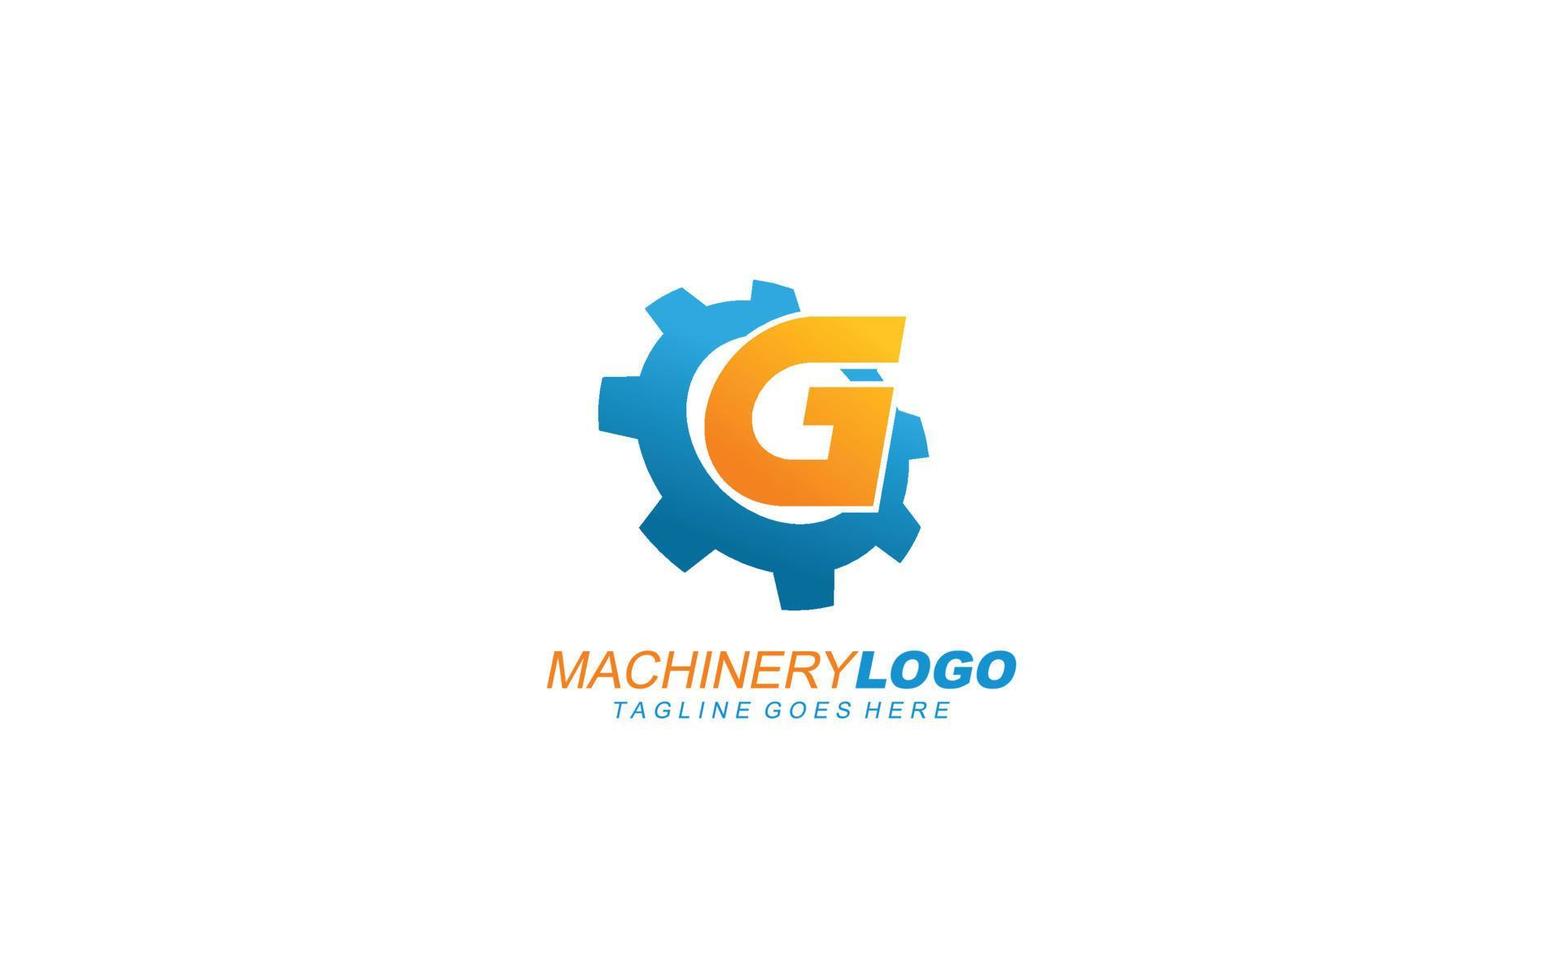 G logo gear for identity. industrial template vector illustration for your brand.